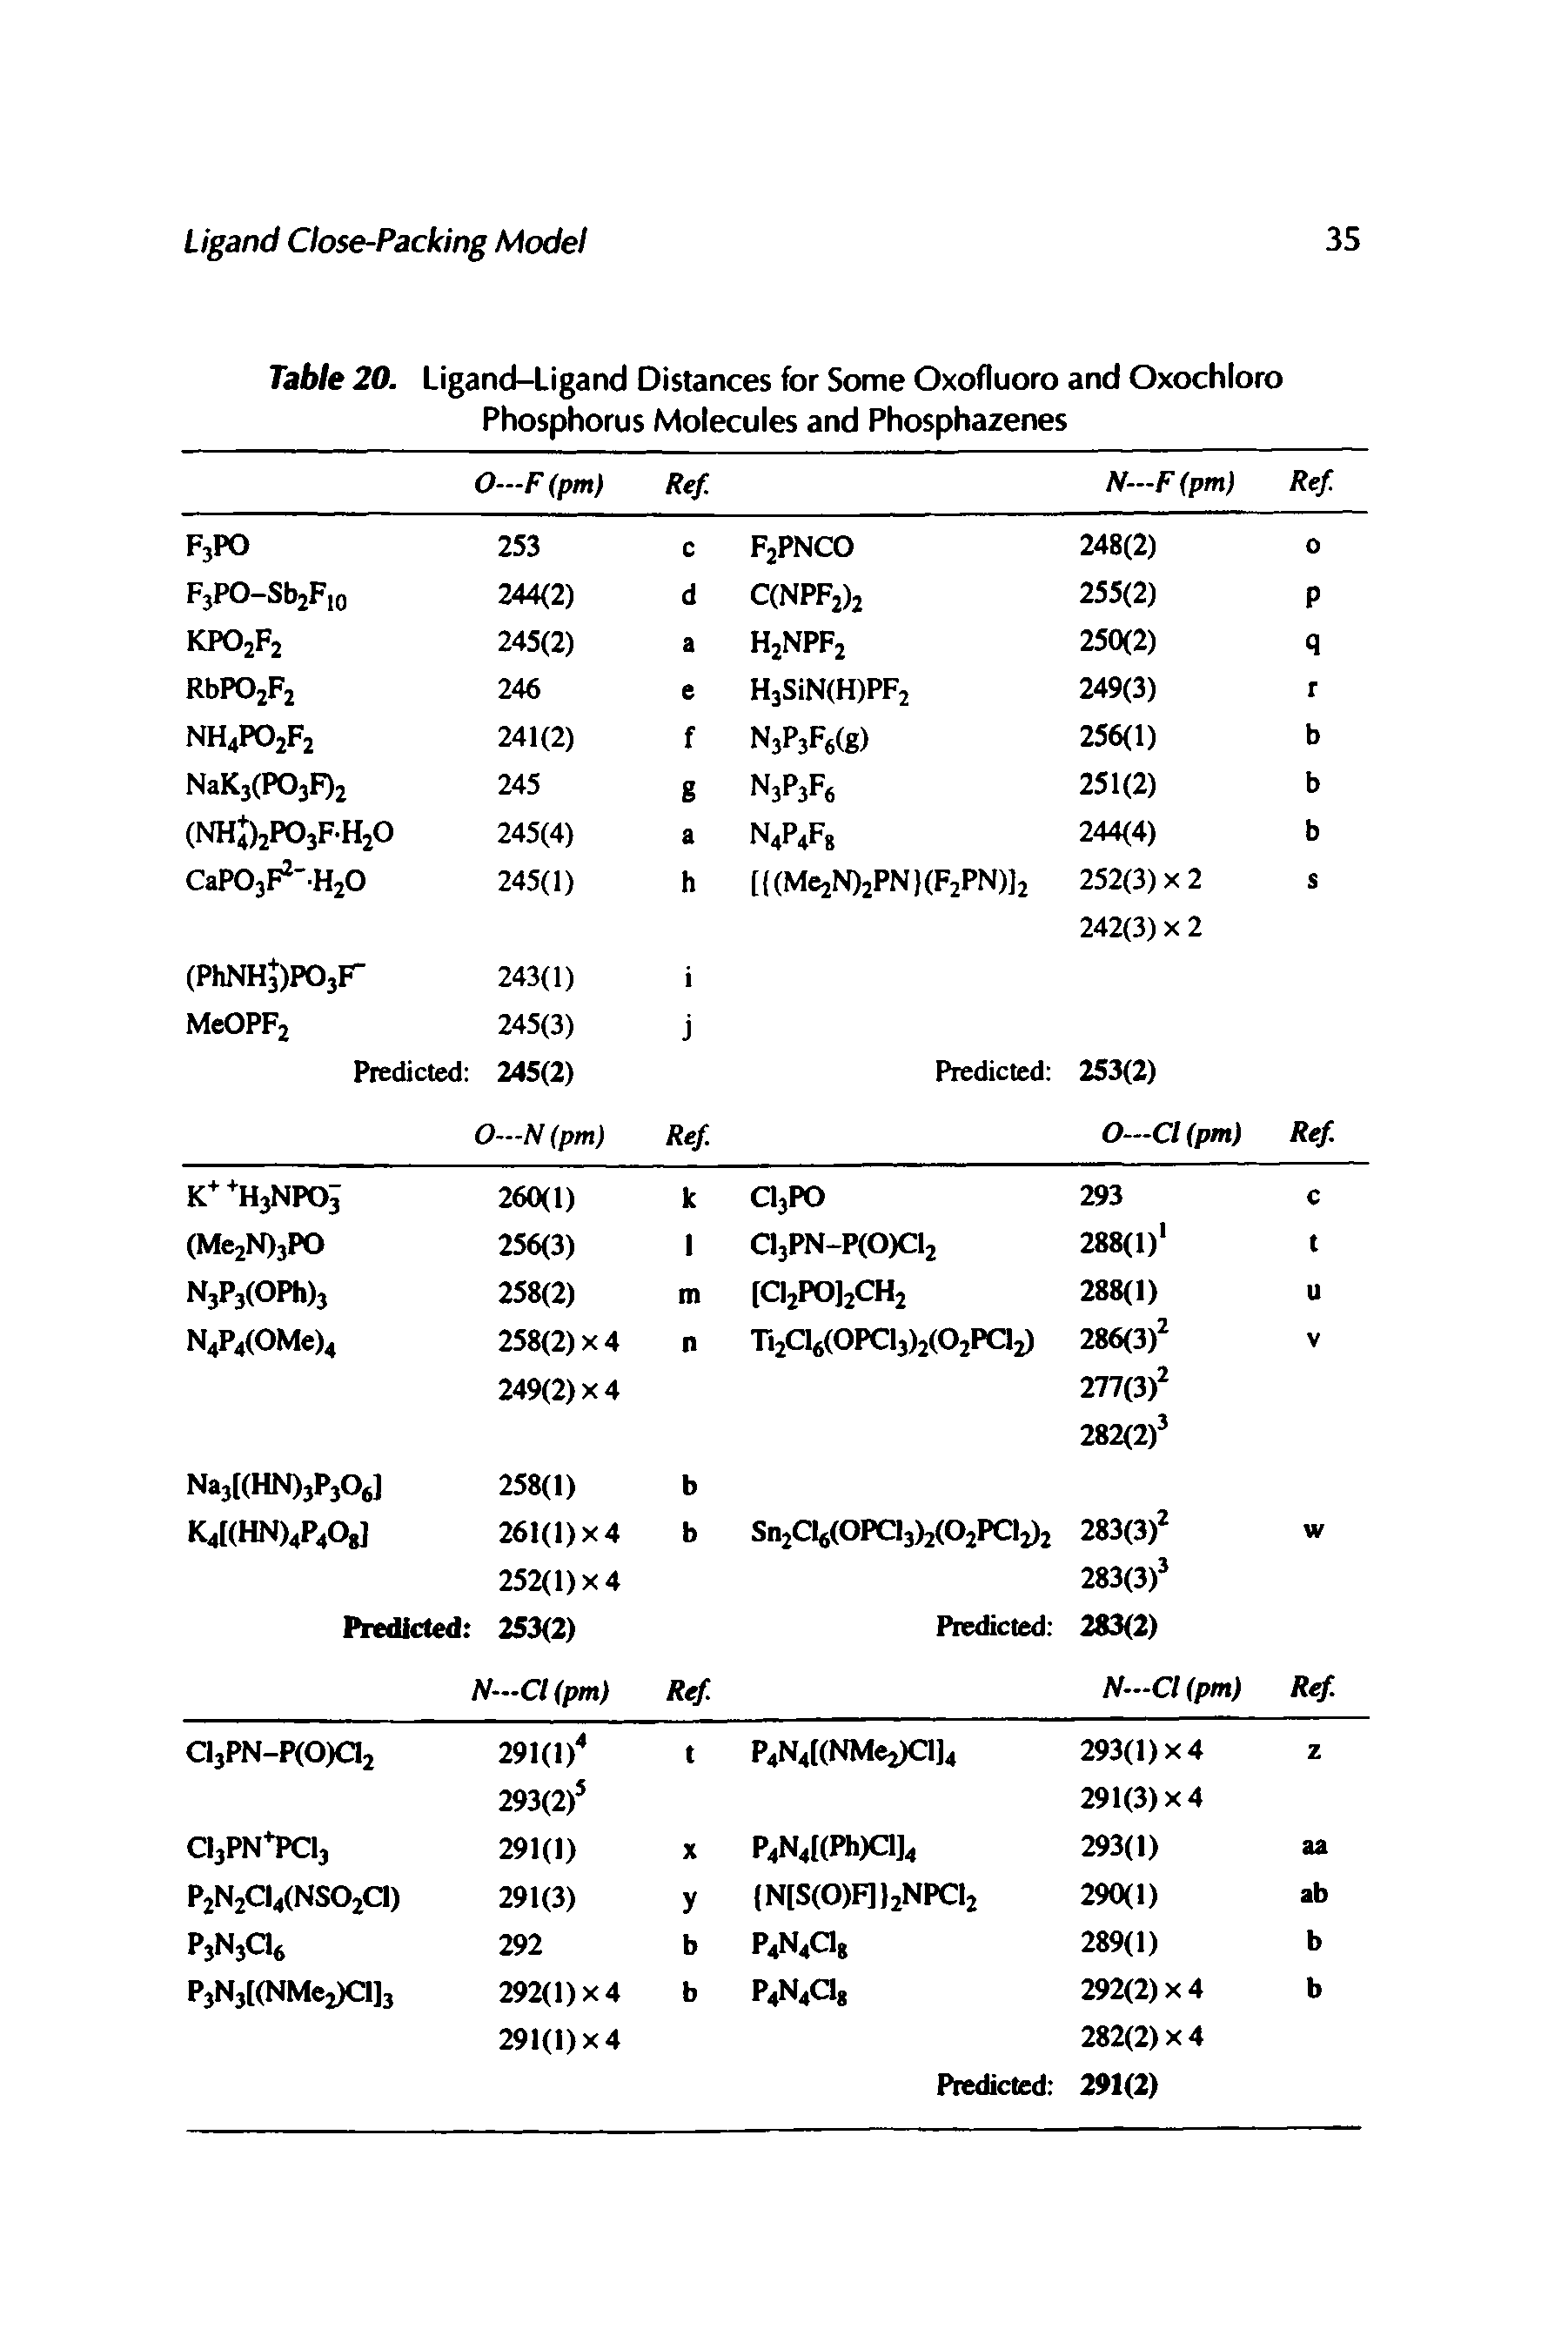 Table 20. Ligand-Ligand Distances for Some Oxofluoro and Oxochloro Phosphorus Molecules and Phosphazenes...